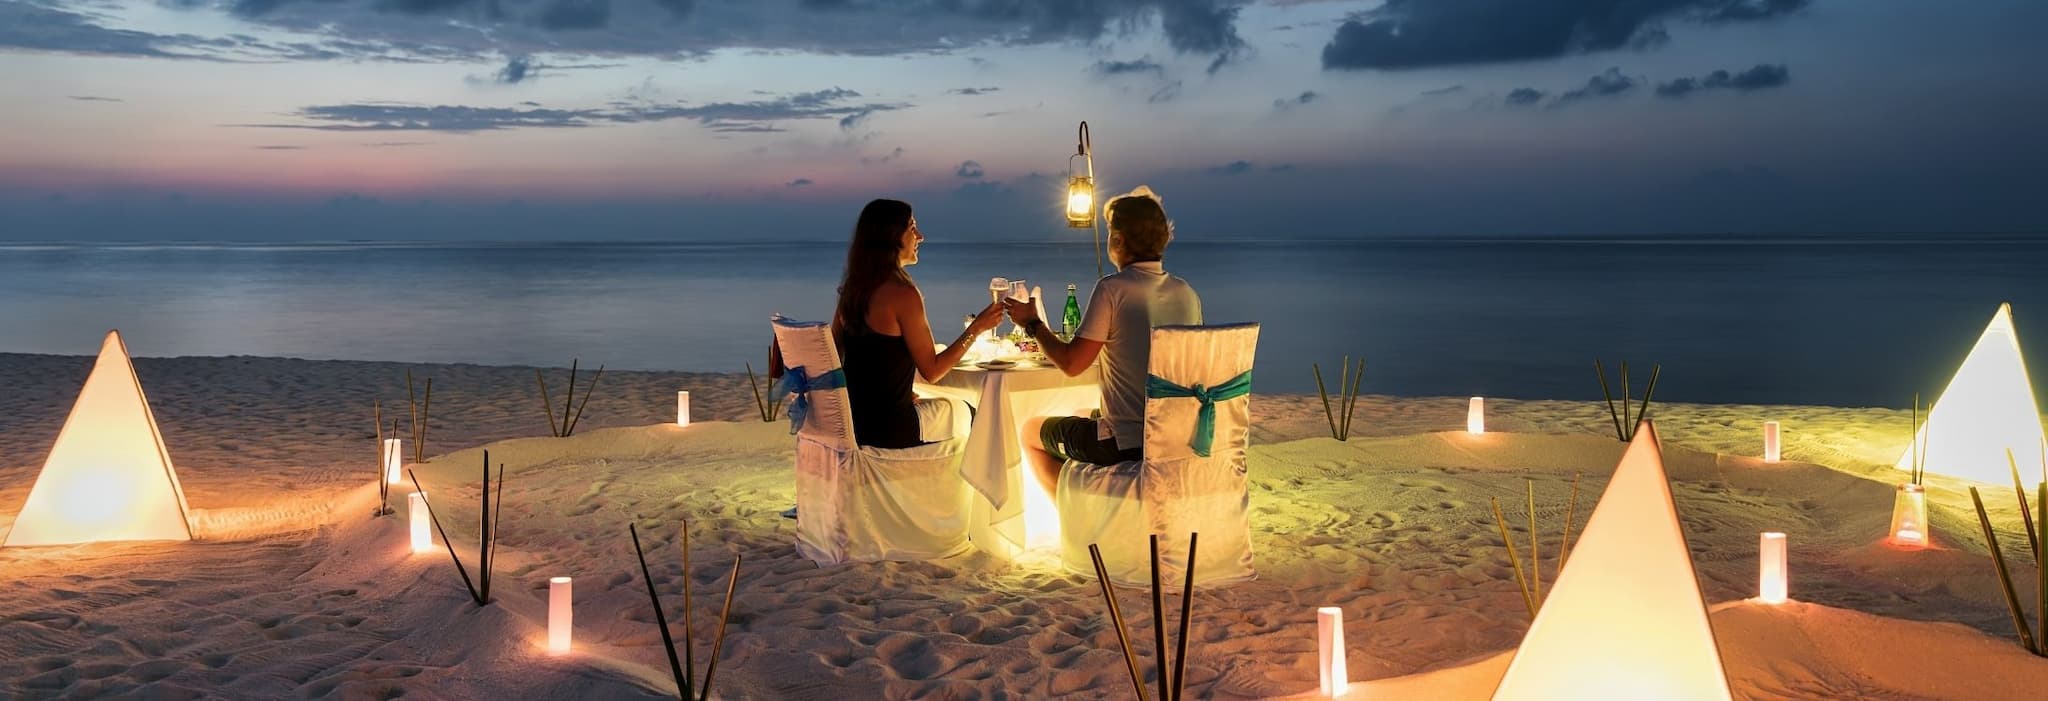 Tips to save on your honeymoon budget